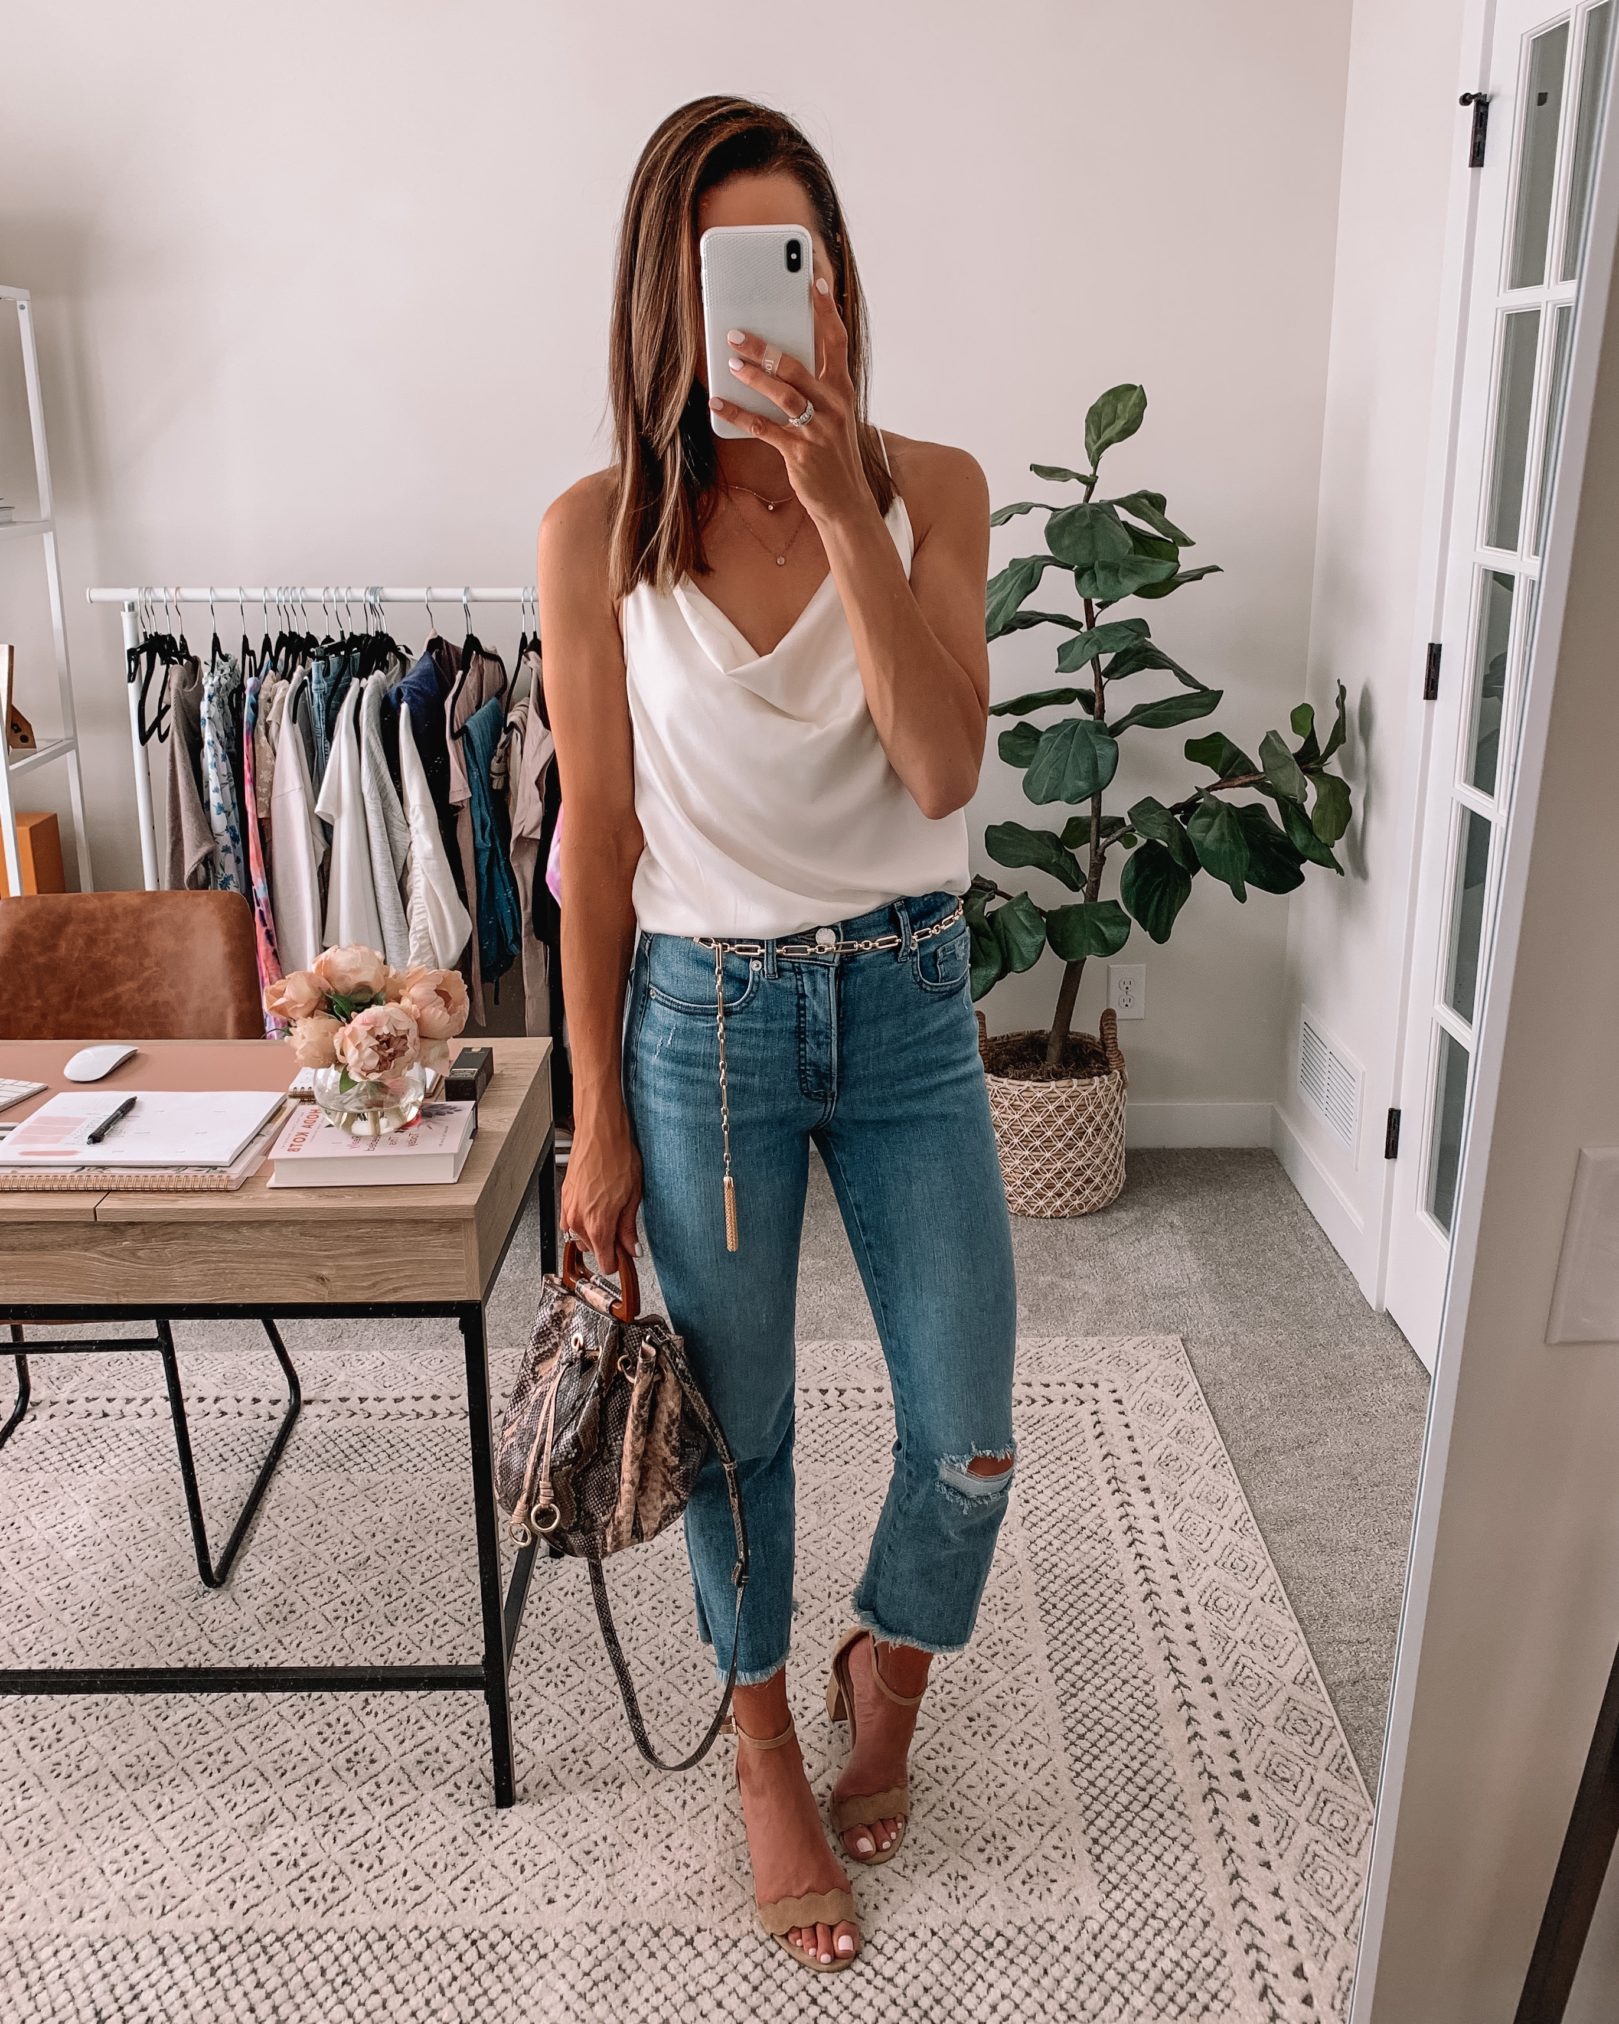 2020 summer date night outfit ideas, gno, girls night out, express outfit, minnesota blogger